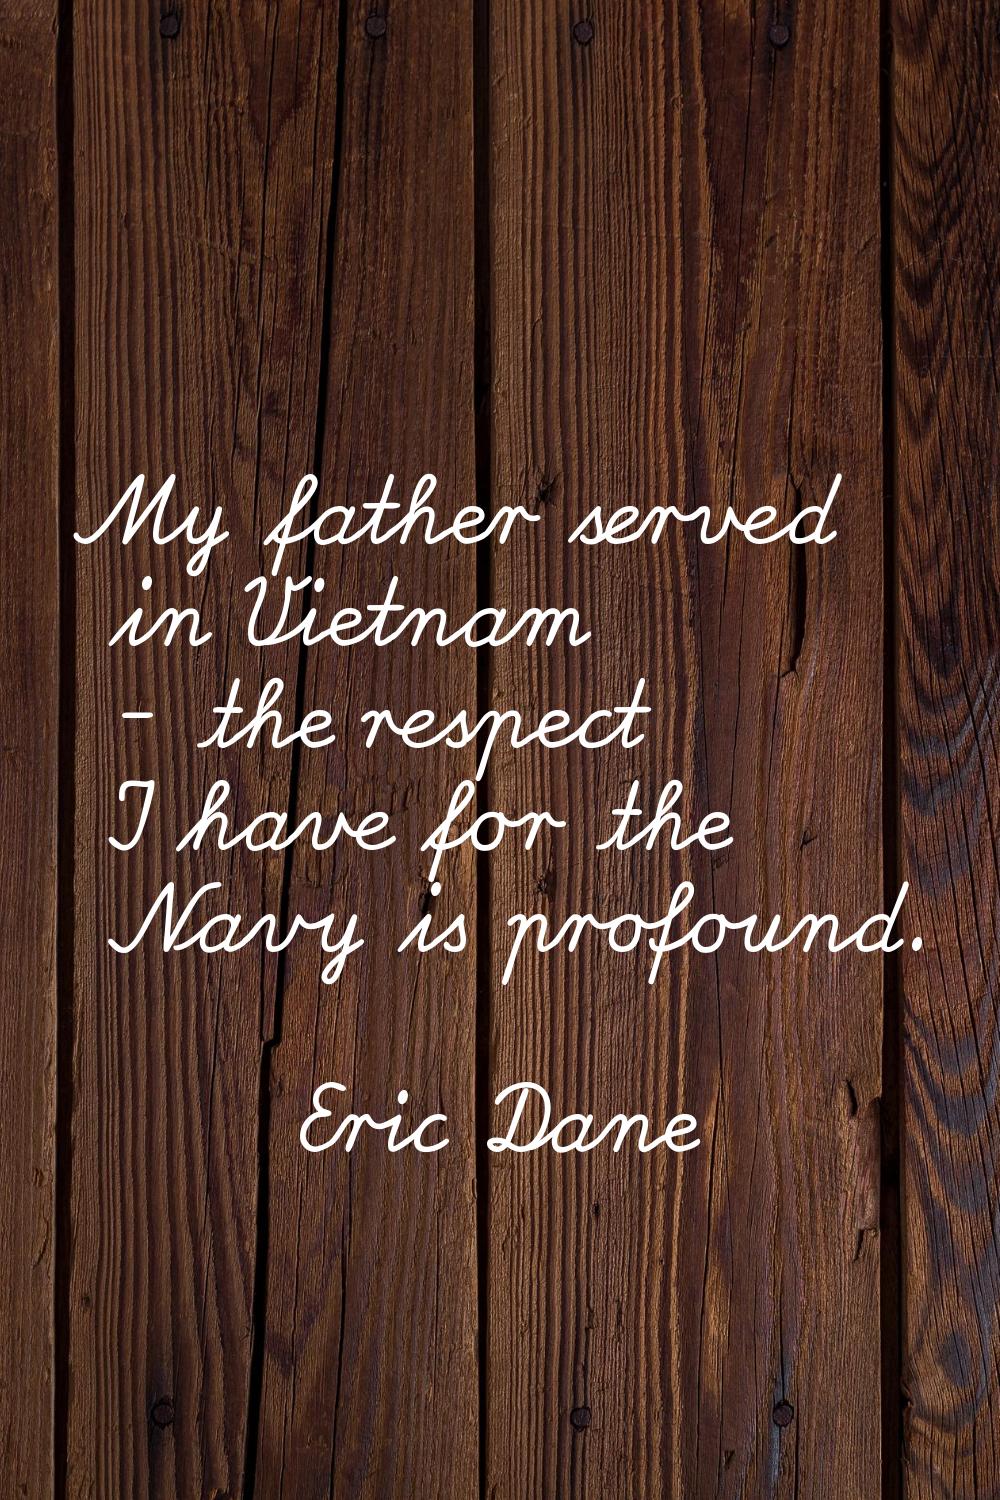 My father served in Vietnam - the respect I have for the Navy is profound.